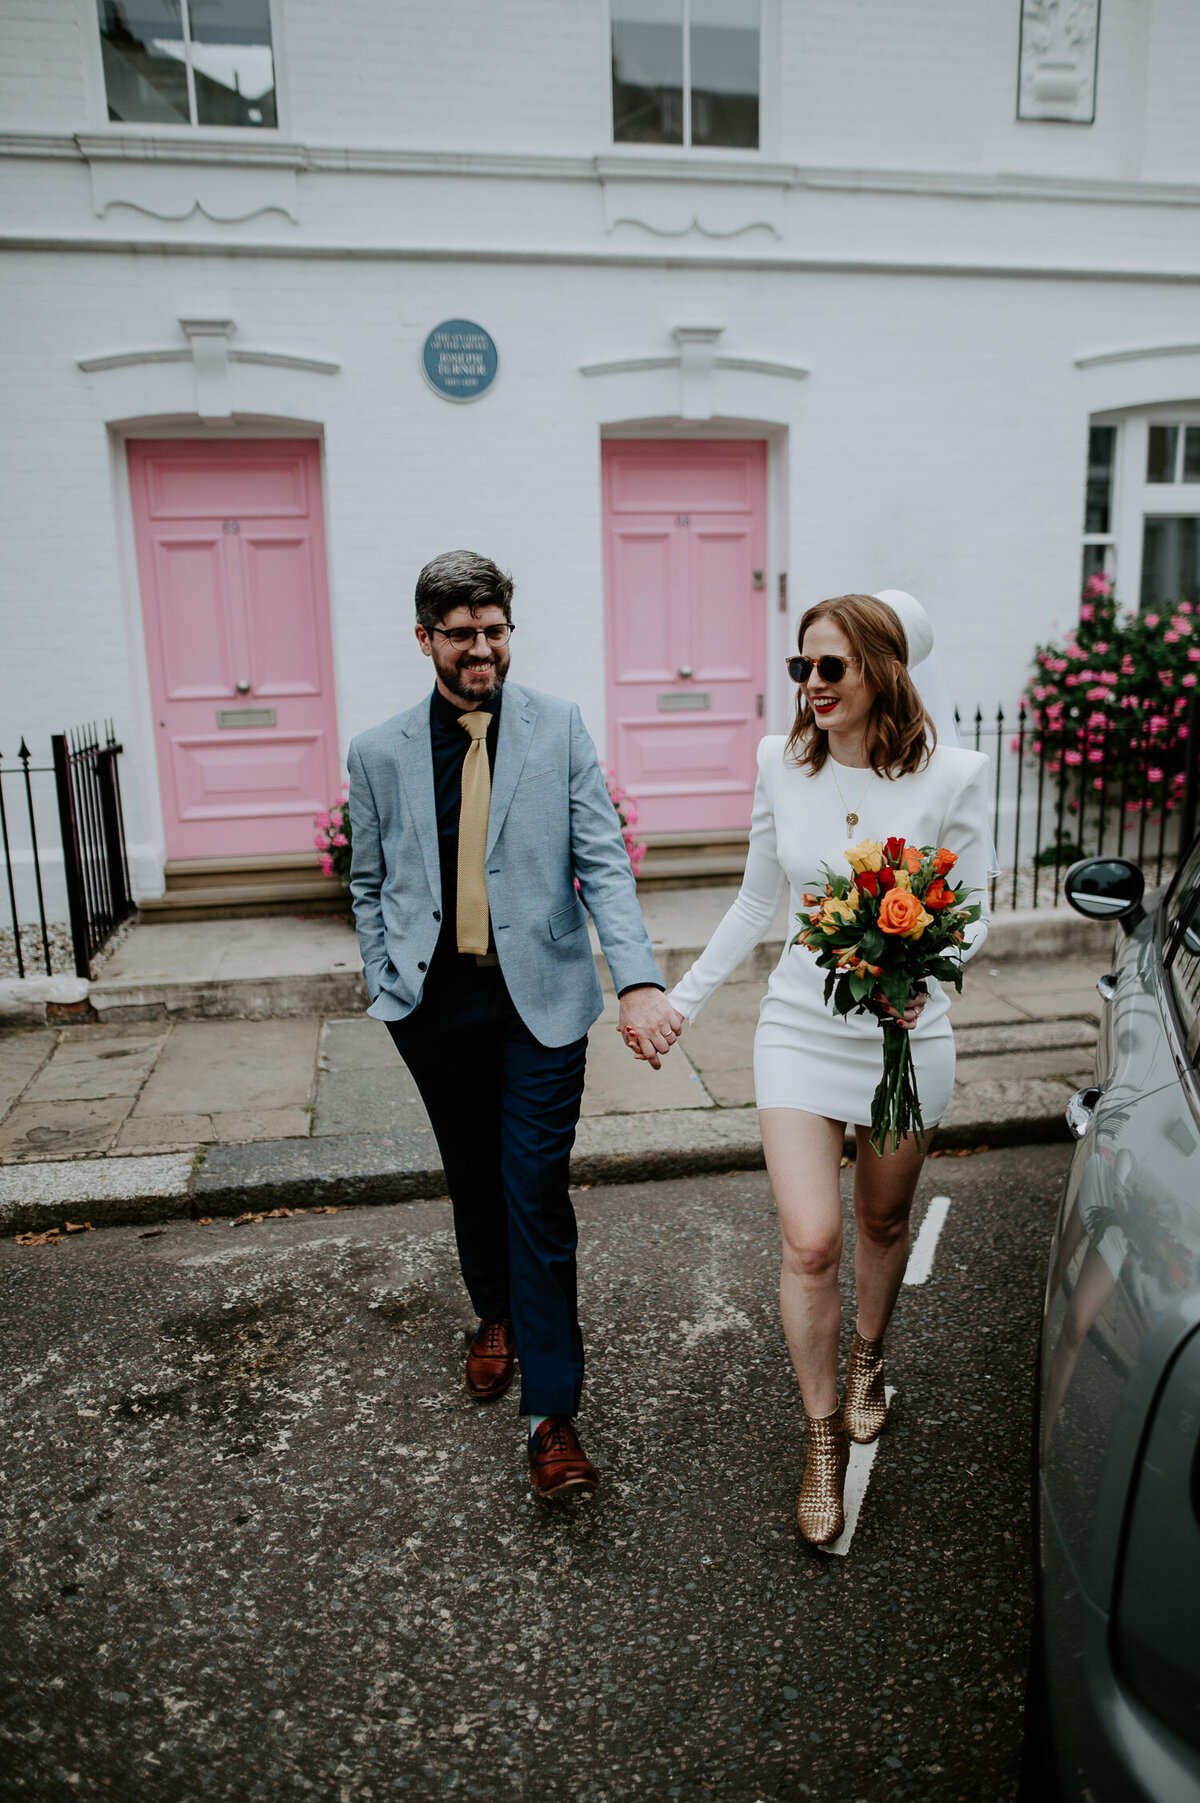 I took this bride and groom to the famous pink doors at Turner Studios in Chelsea, London. The bride is wearing a short Neta Porter dress and has a vintage hat, he bouquet was picked up that morning from the Chelsea Flower Show.